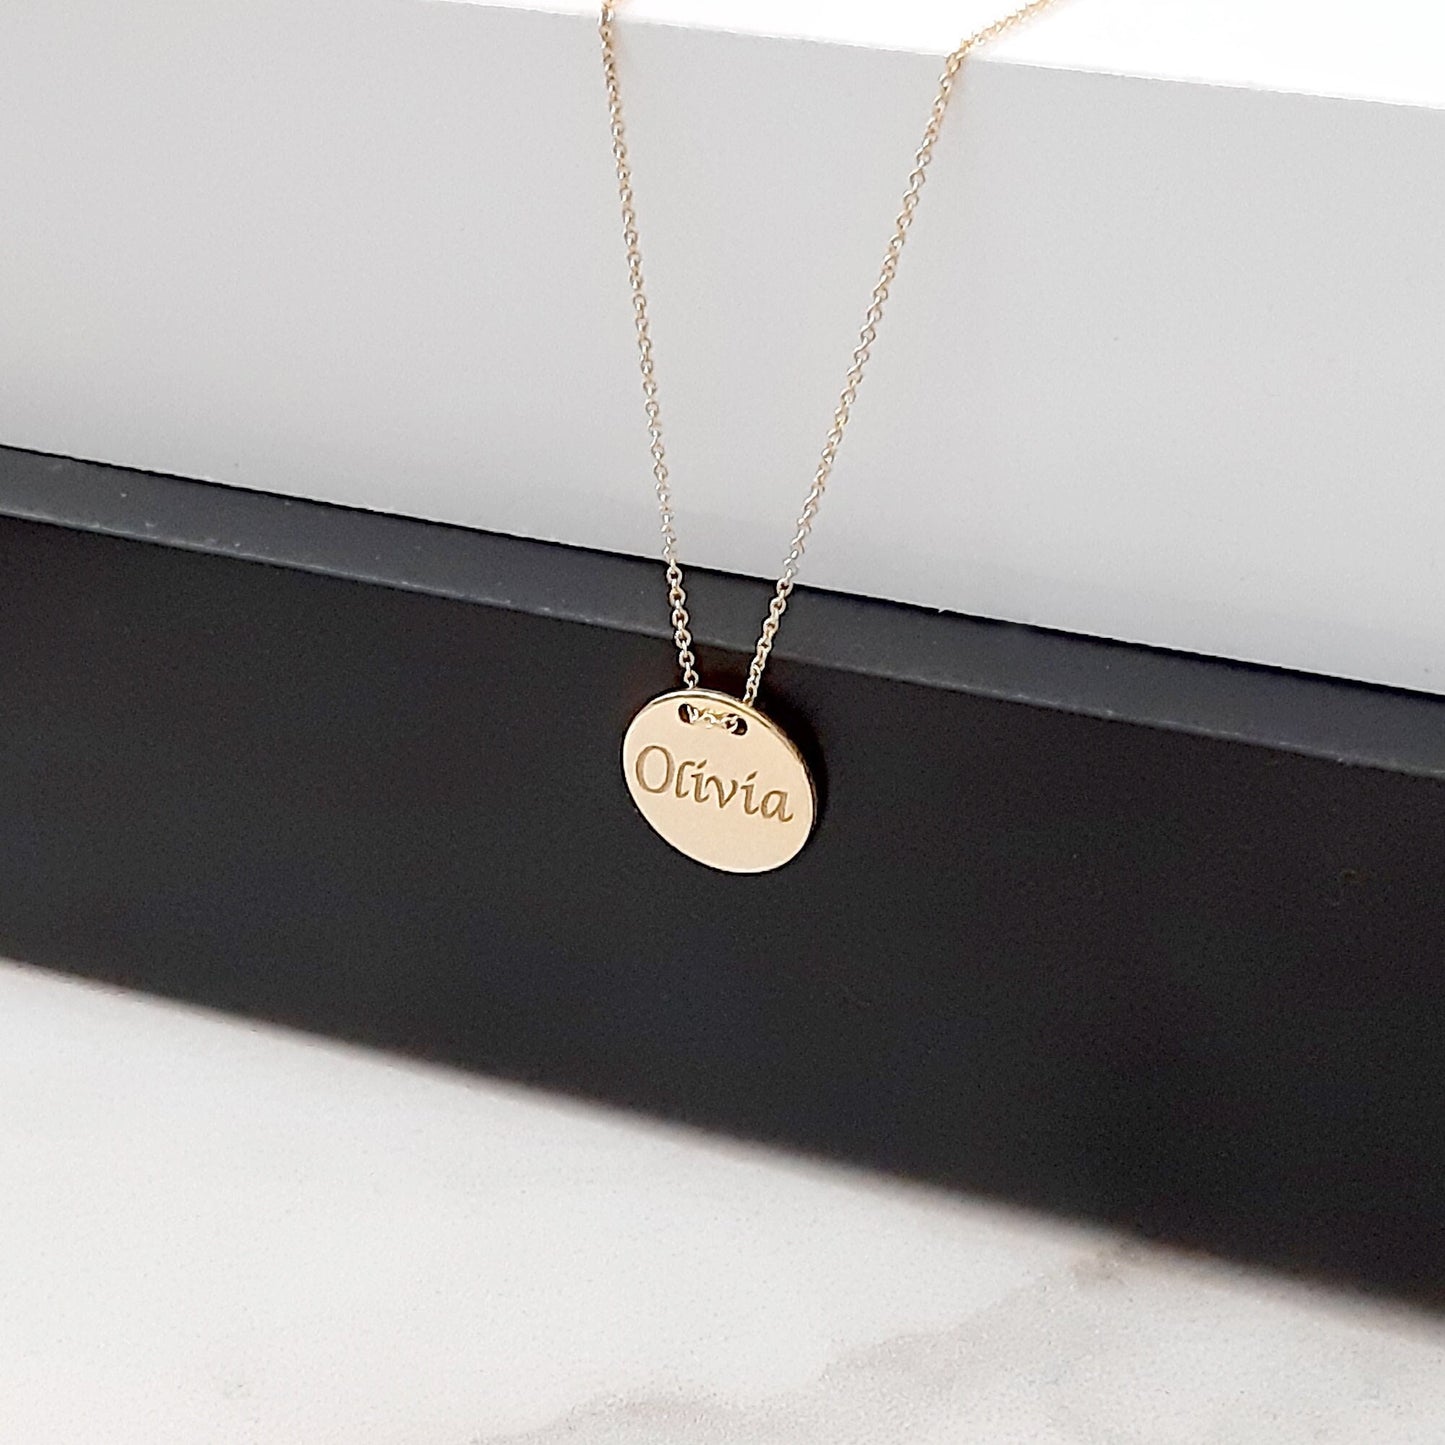 Personalized Disc Name Necklace • 14k solid gold Necklace • Mom Necklace • Kid Name Necklace • Custom Family Jewelry, 14k gold necklace gift